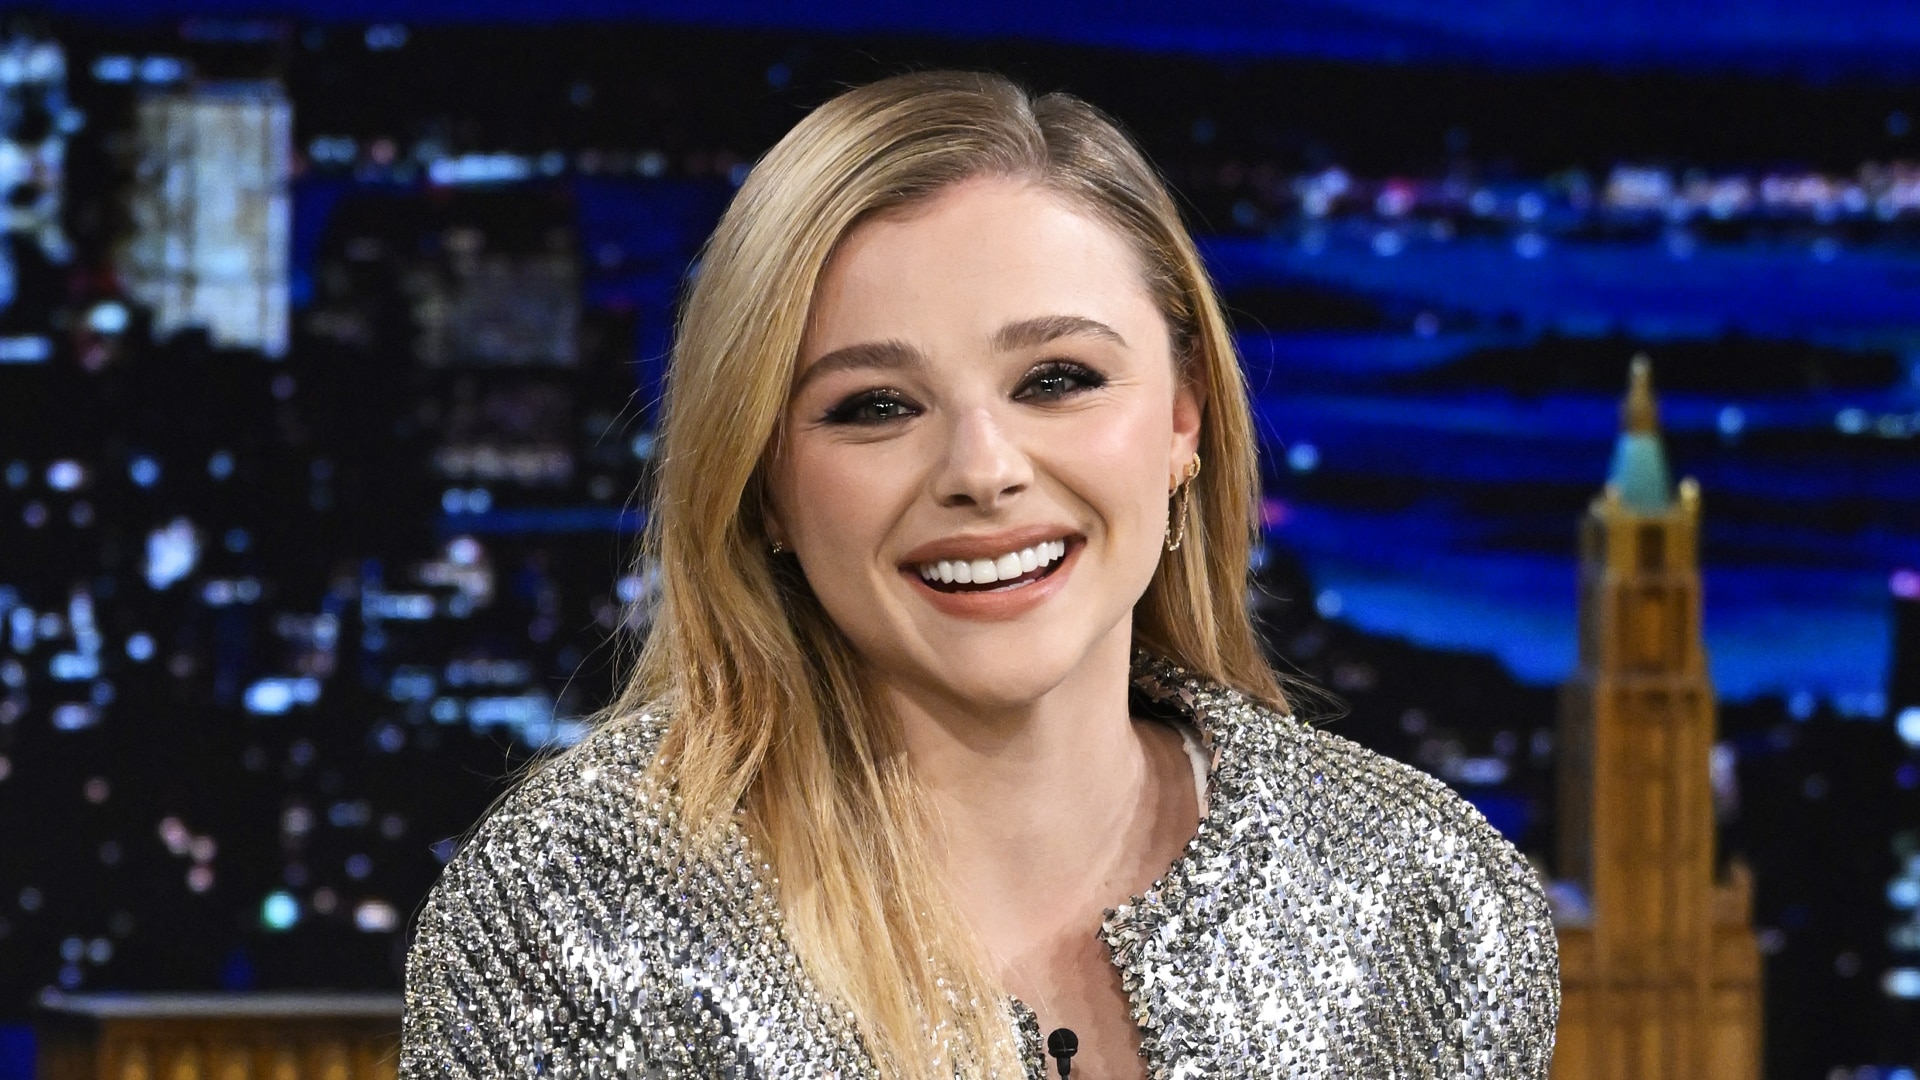 A closer look at Chloë Grace Moretz movies (2021/05/16)- Tickets to Movies  in Theaters, Broadway Shows, London Theatre & More